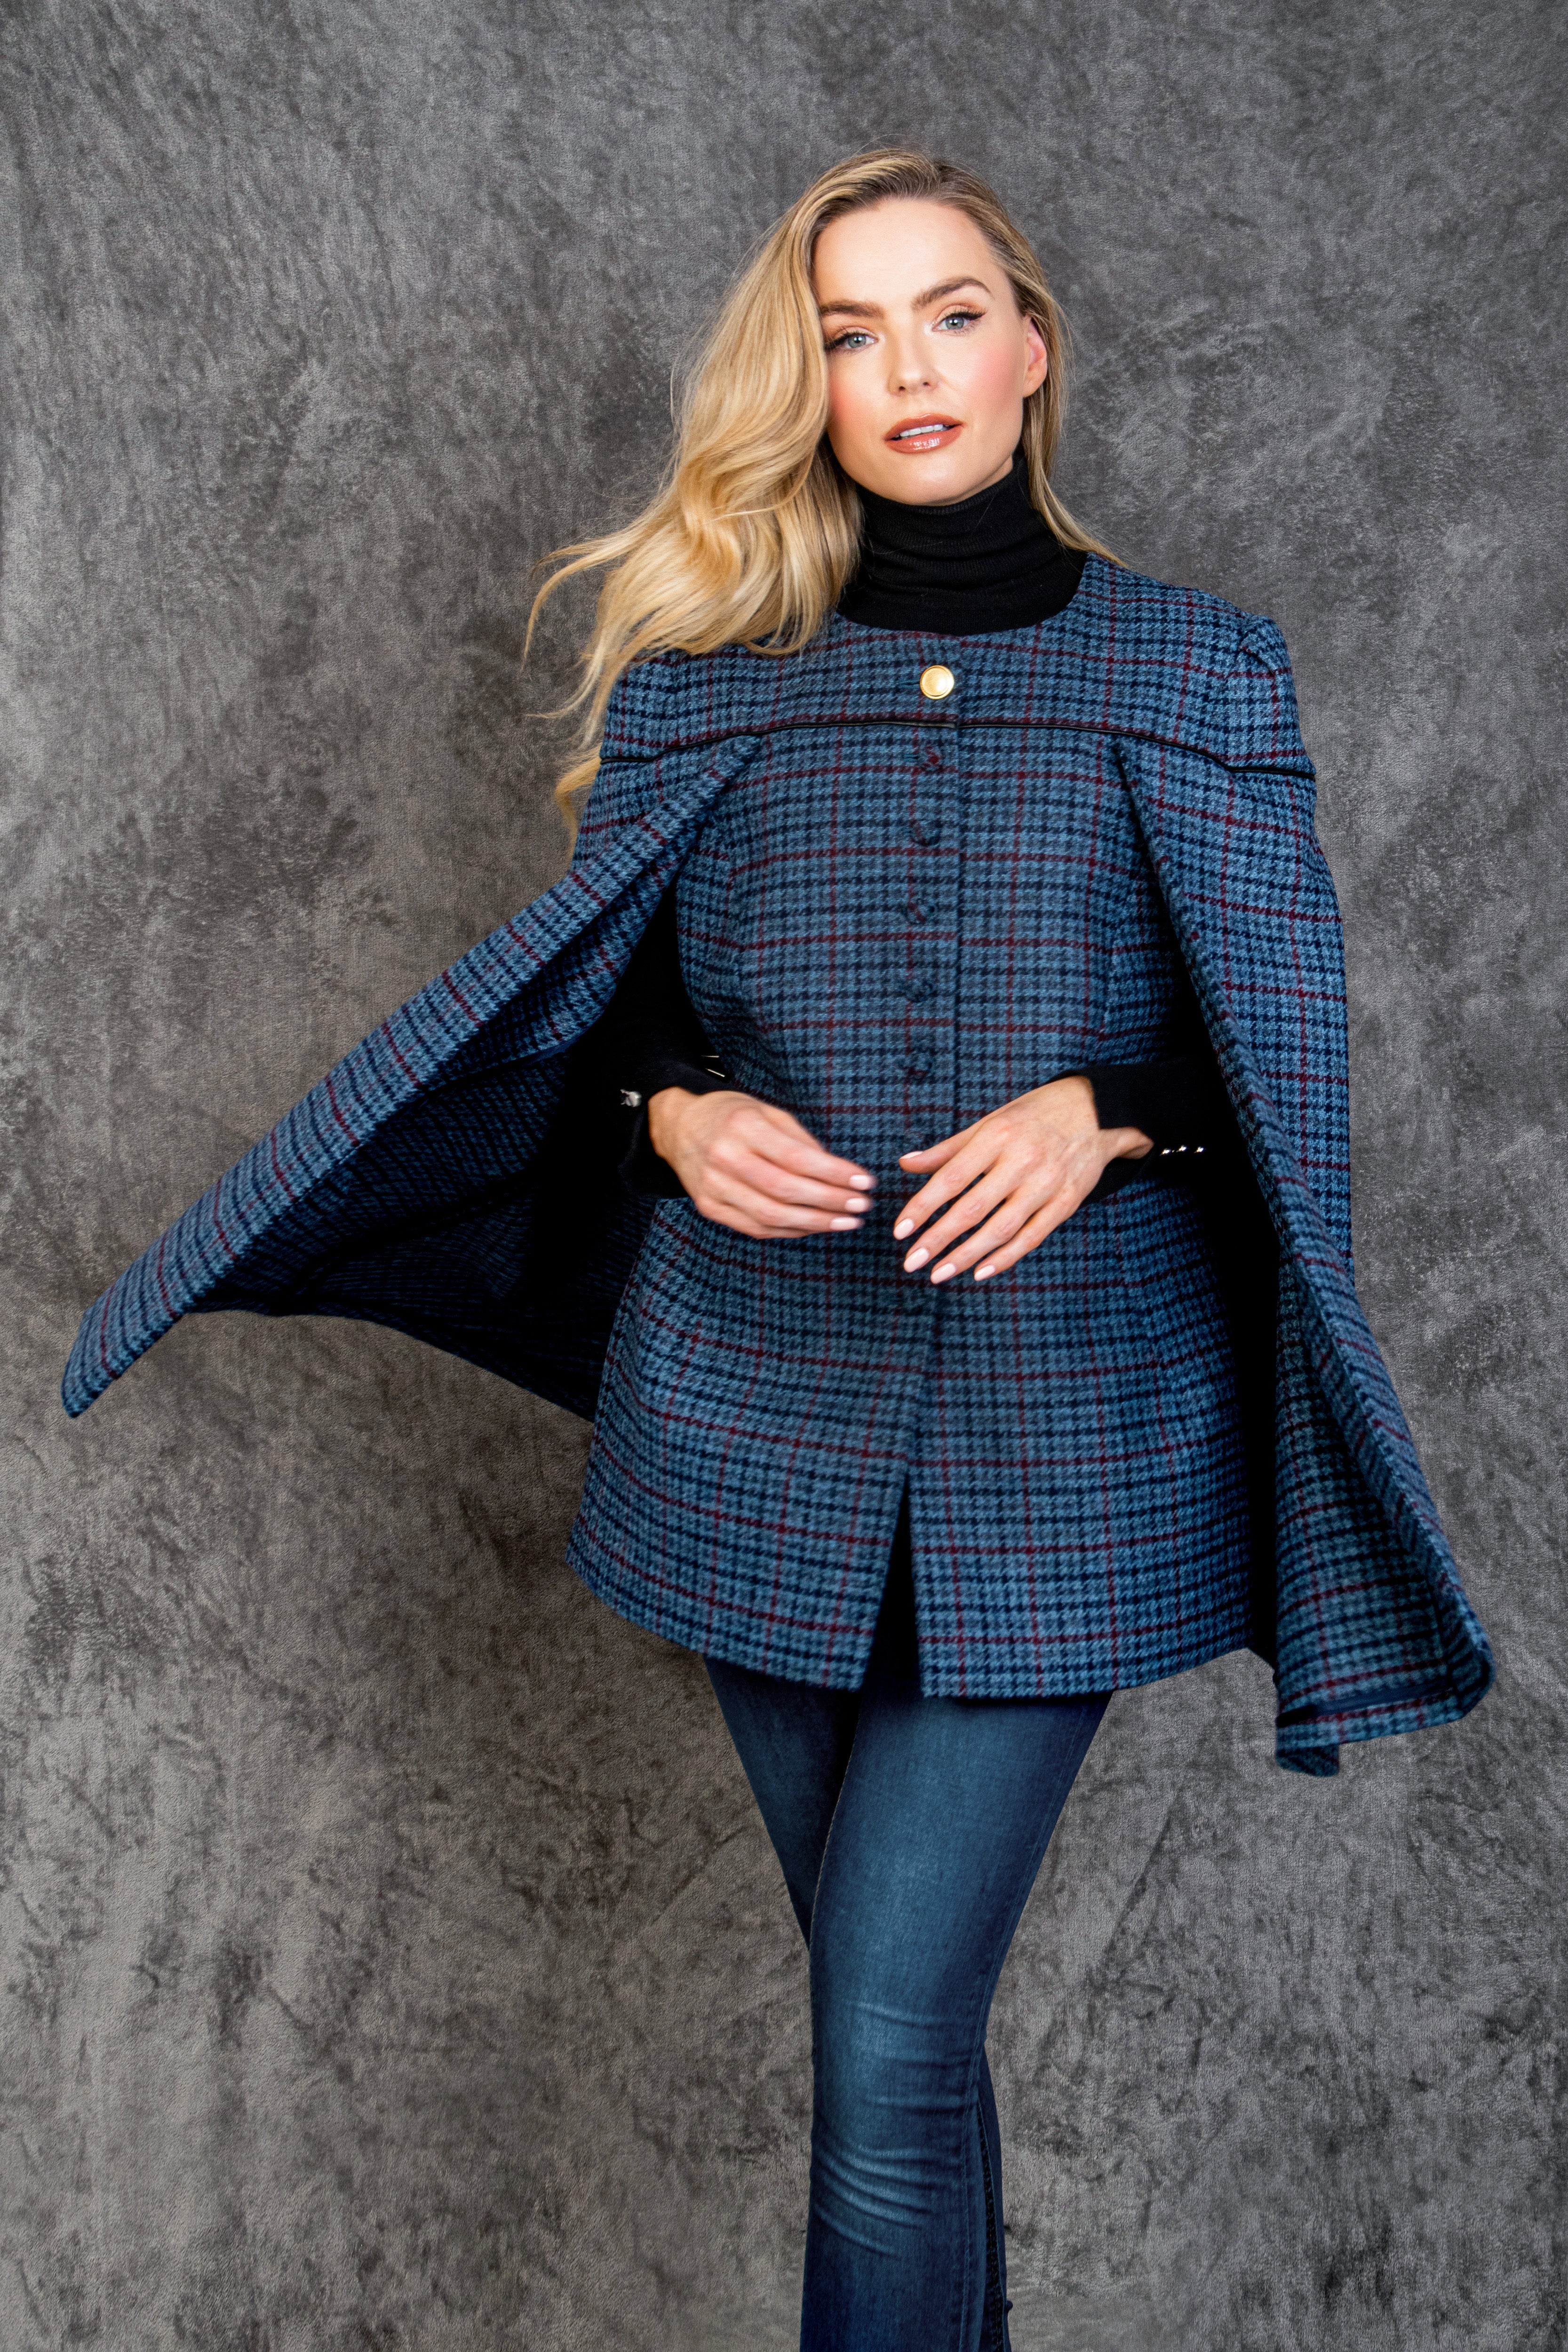 Aisling II Tailored Cape - Navy Hacking Check - Jack Murphy Ireland